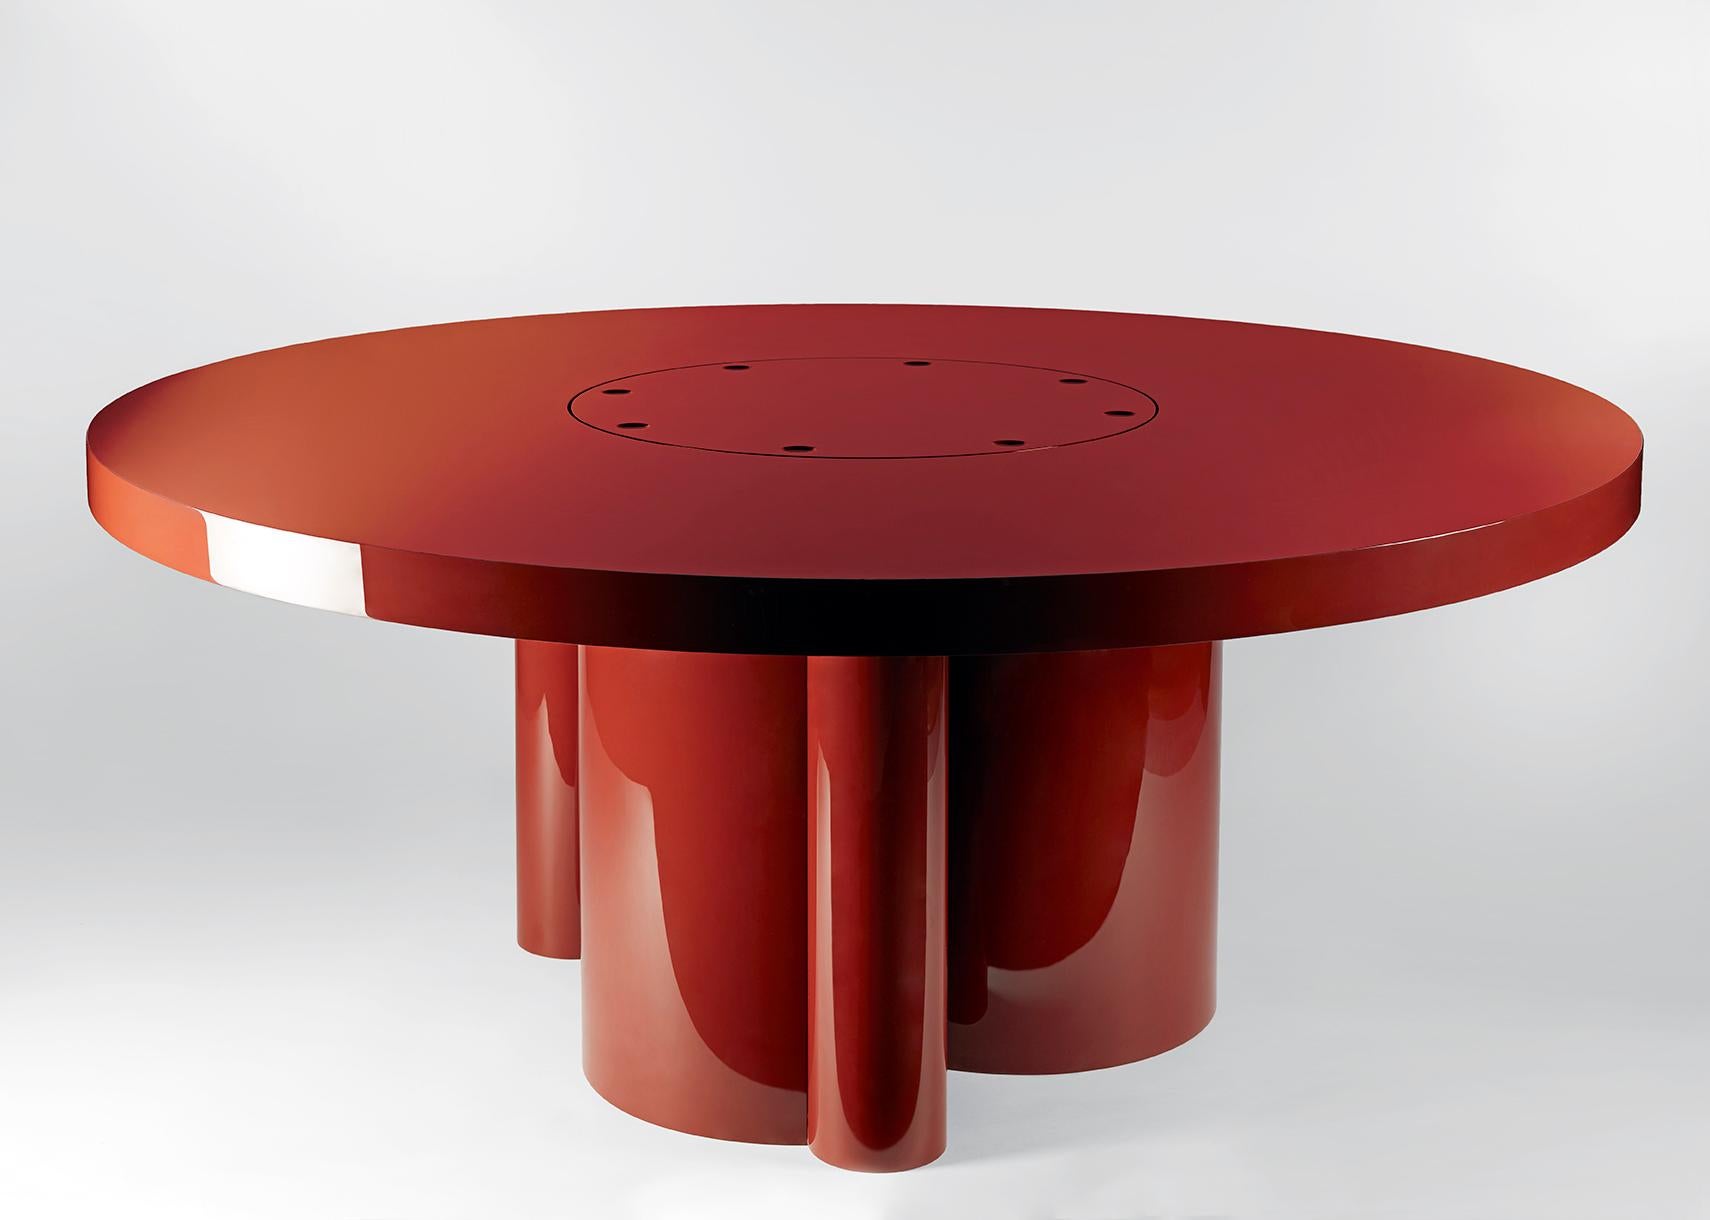 Cherry dining table by Gisbert Pöppler
Dimensions: D 180 x W 180 x H 74 cm
Materials: red lacquered aluminum

The refreshing red is not the origin of this dining table’s name, but rather the playful form of its base! Shaped like cherries with